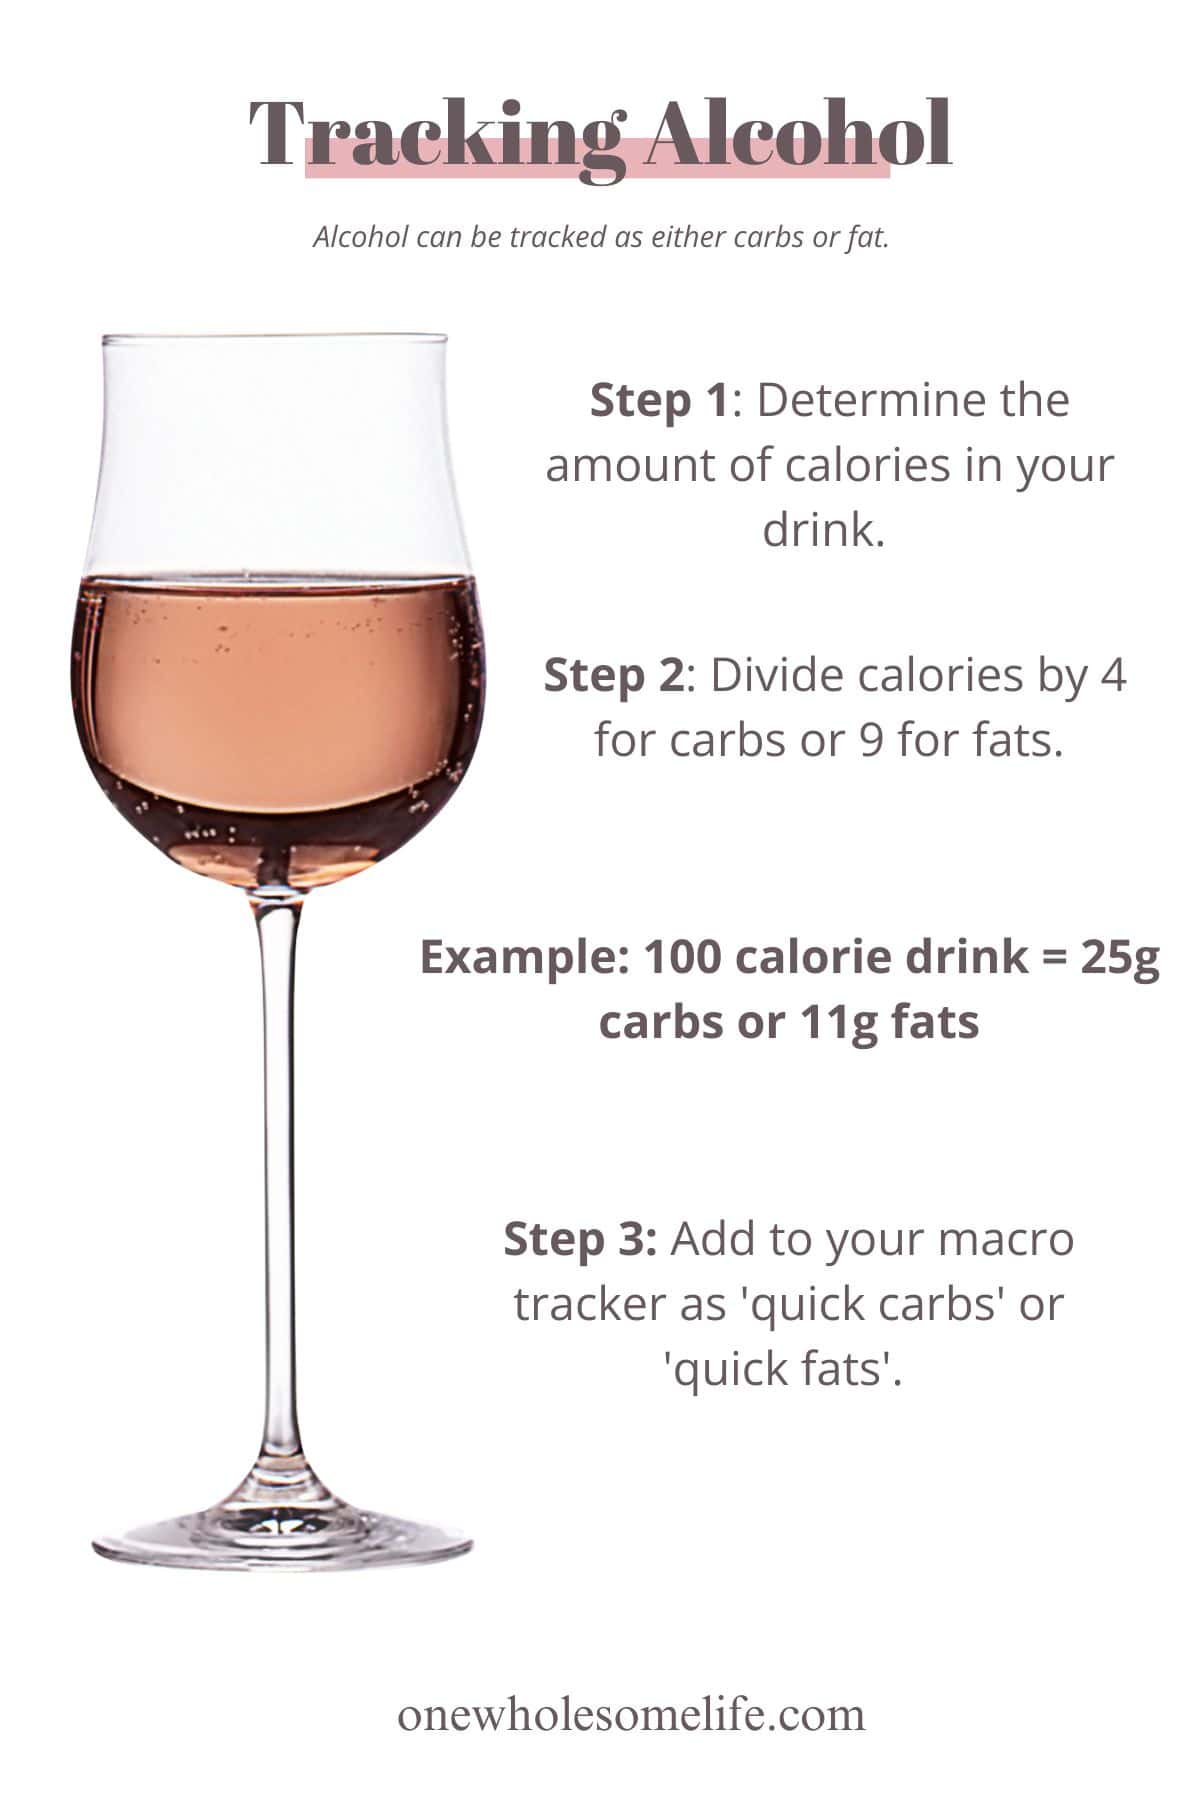 A glass of wine with instructions on how to track alcohol and understand macronutrients.